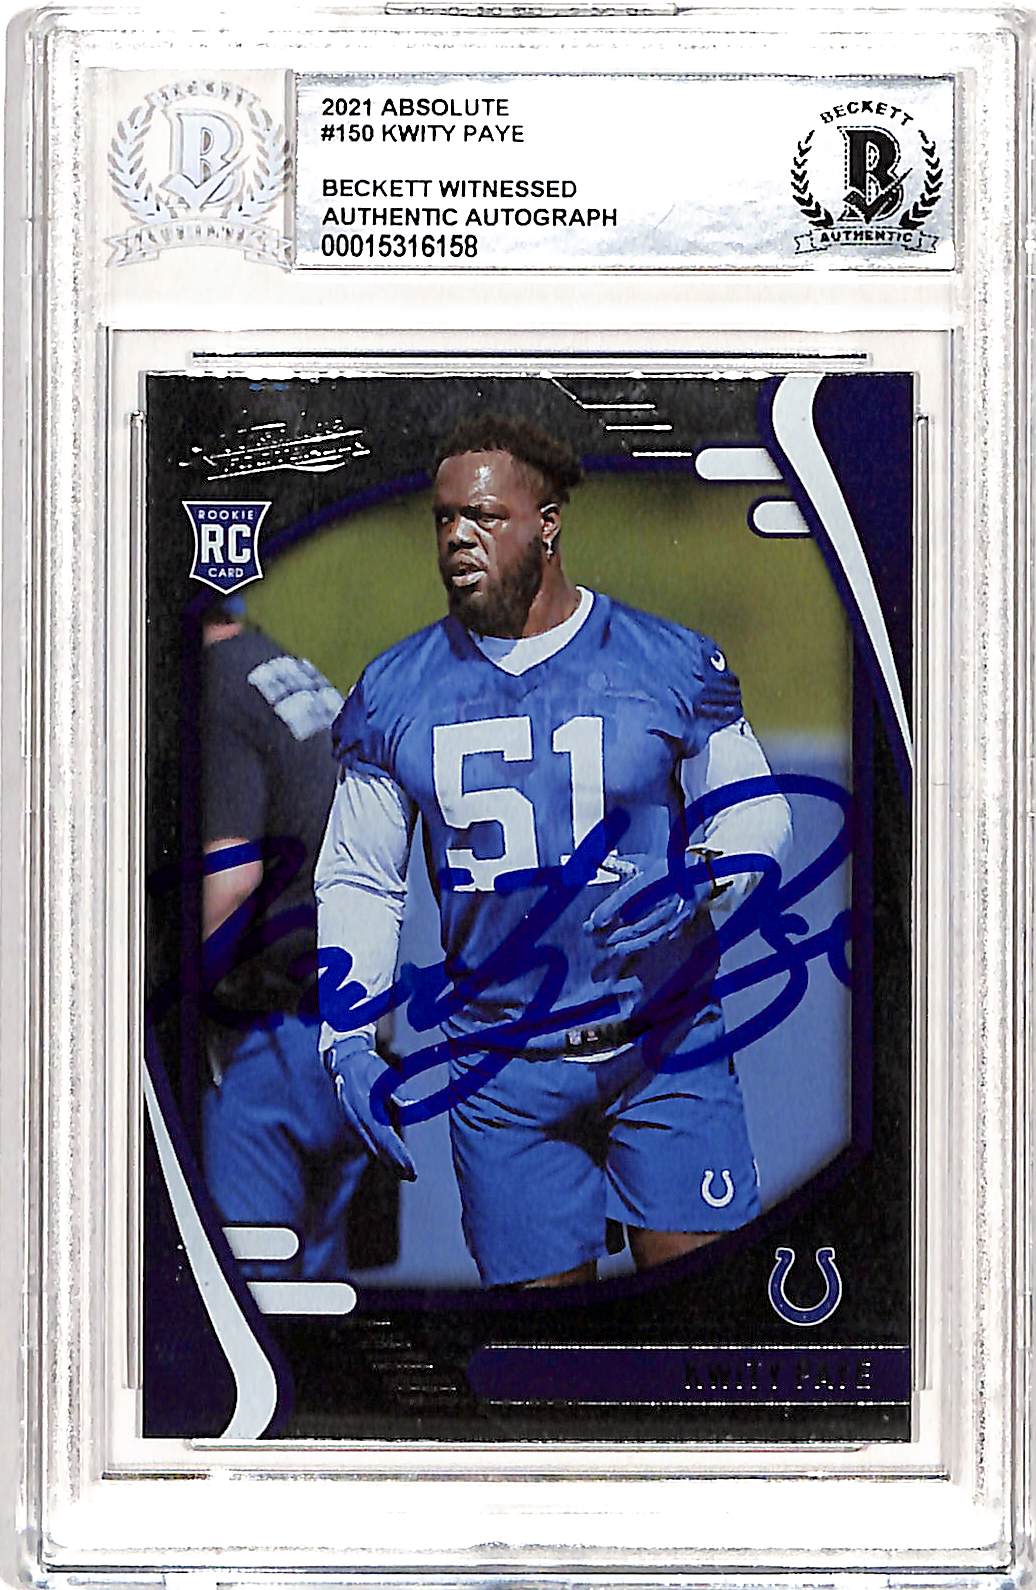 Kwity Paye Autographed Absolute 2021 #150 Trading Card Slabbed Beckett